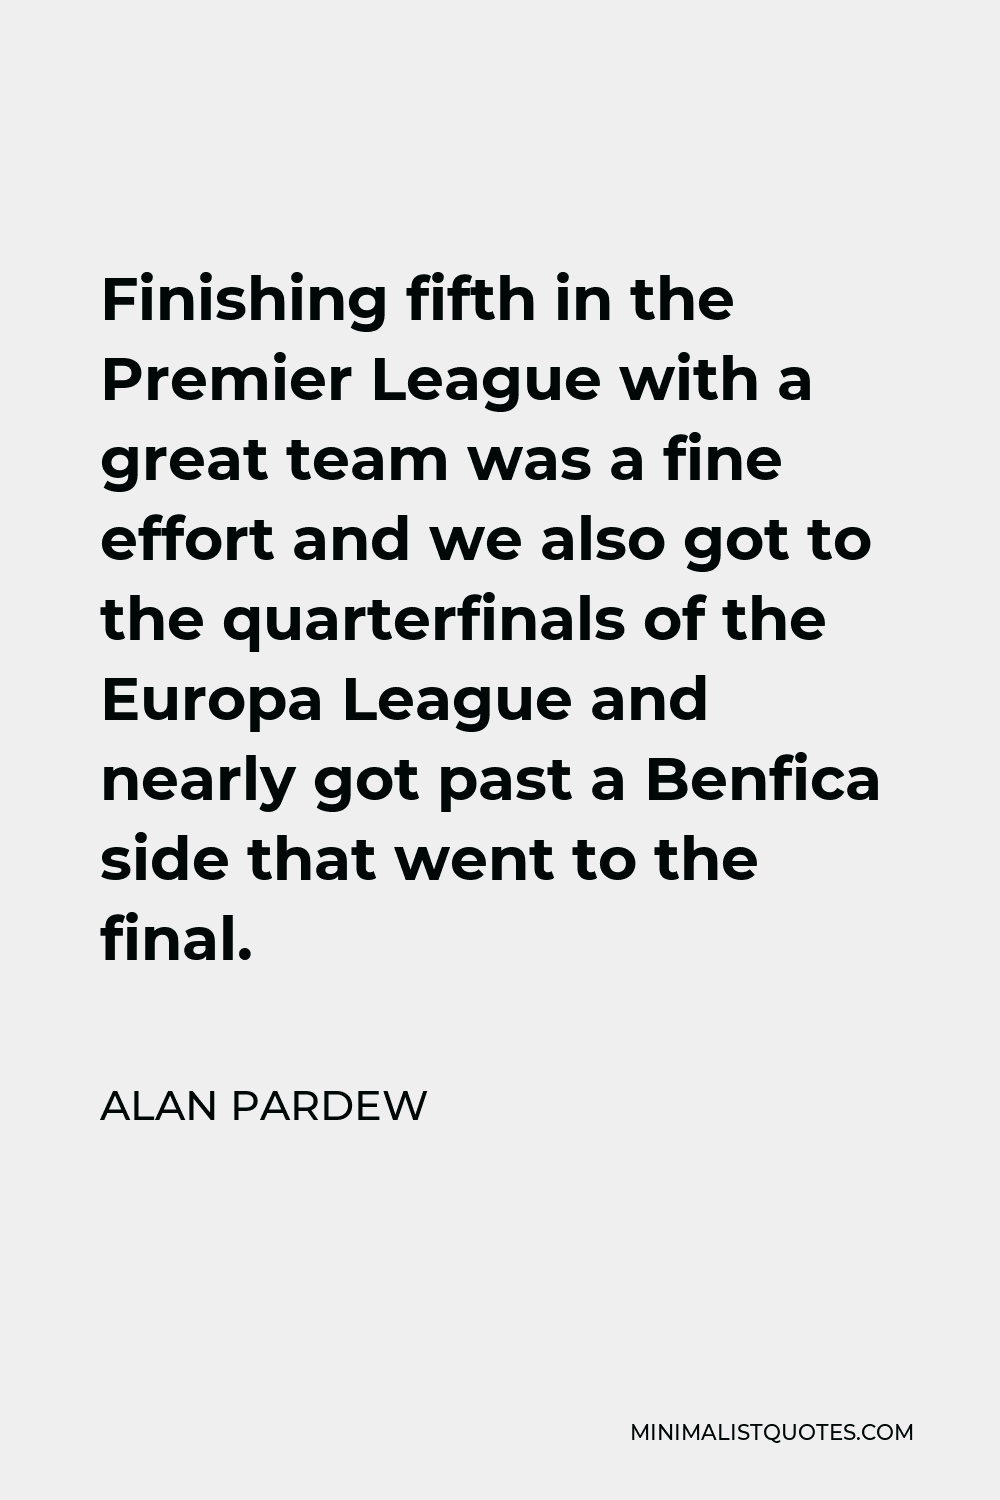 Alan Pardew Quote - Finishing fifth in the Premier League with a great team was a fine effort and we also got to the quarterfinals of the Europa League and nearly got past a Benfica side that went to the final.